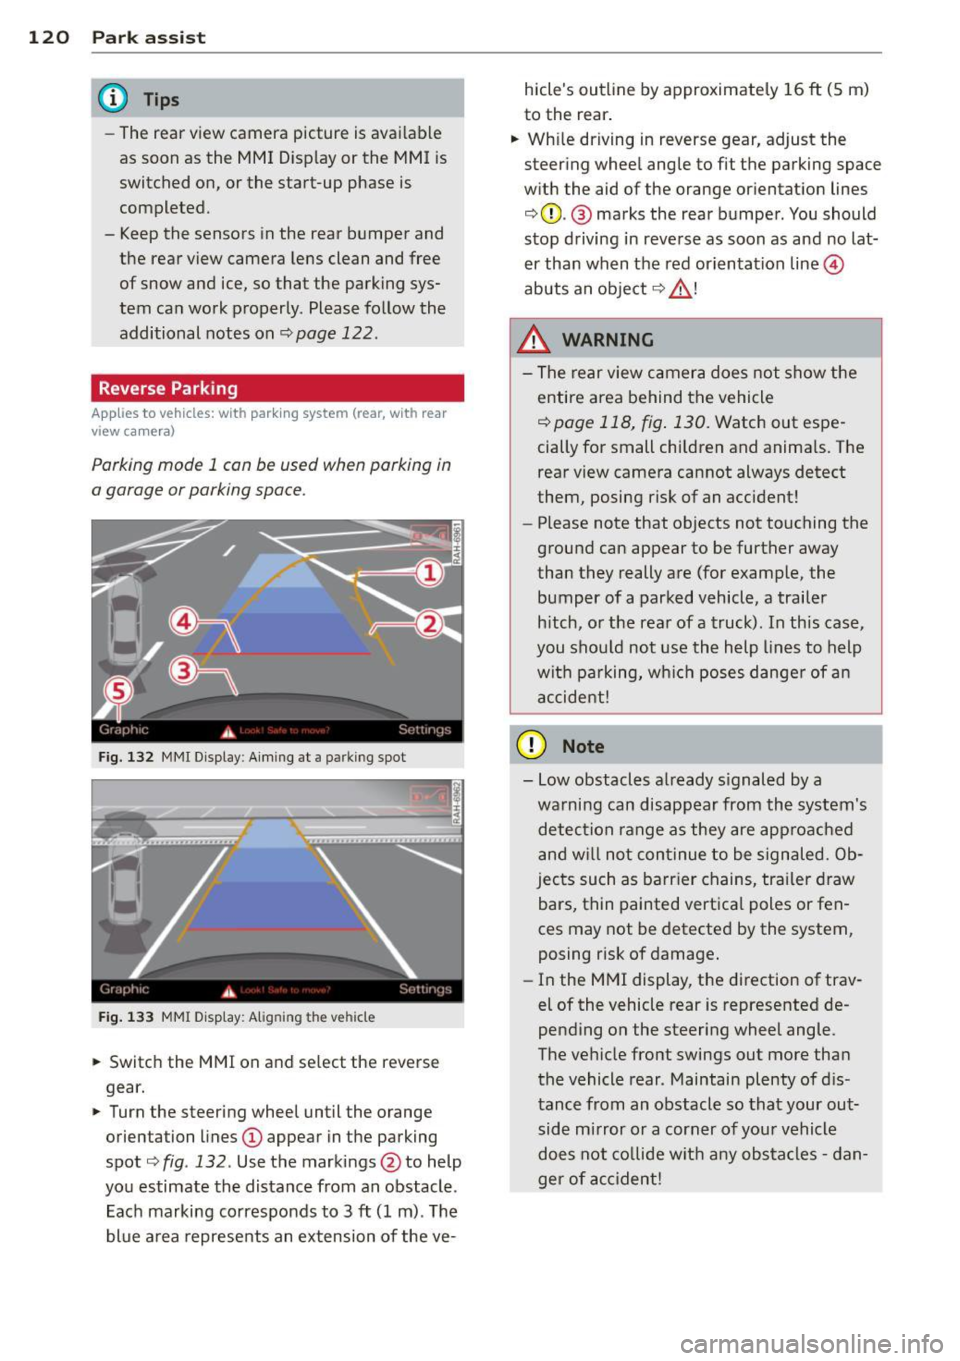 AUDI A4 2013  Owners Manual 120  Park  ass is t 
@ Tips 
- The  rear  view camera  picture  is avai lable 
as  soon  as  the  MMI Display or  the  MMI  is 
switched  on,  or  the  start-up  phase  is 
completed. 
- Keep the  sen